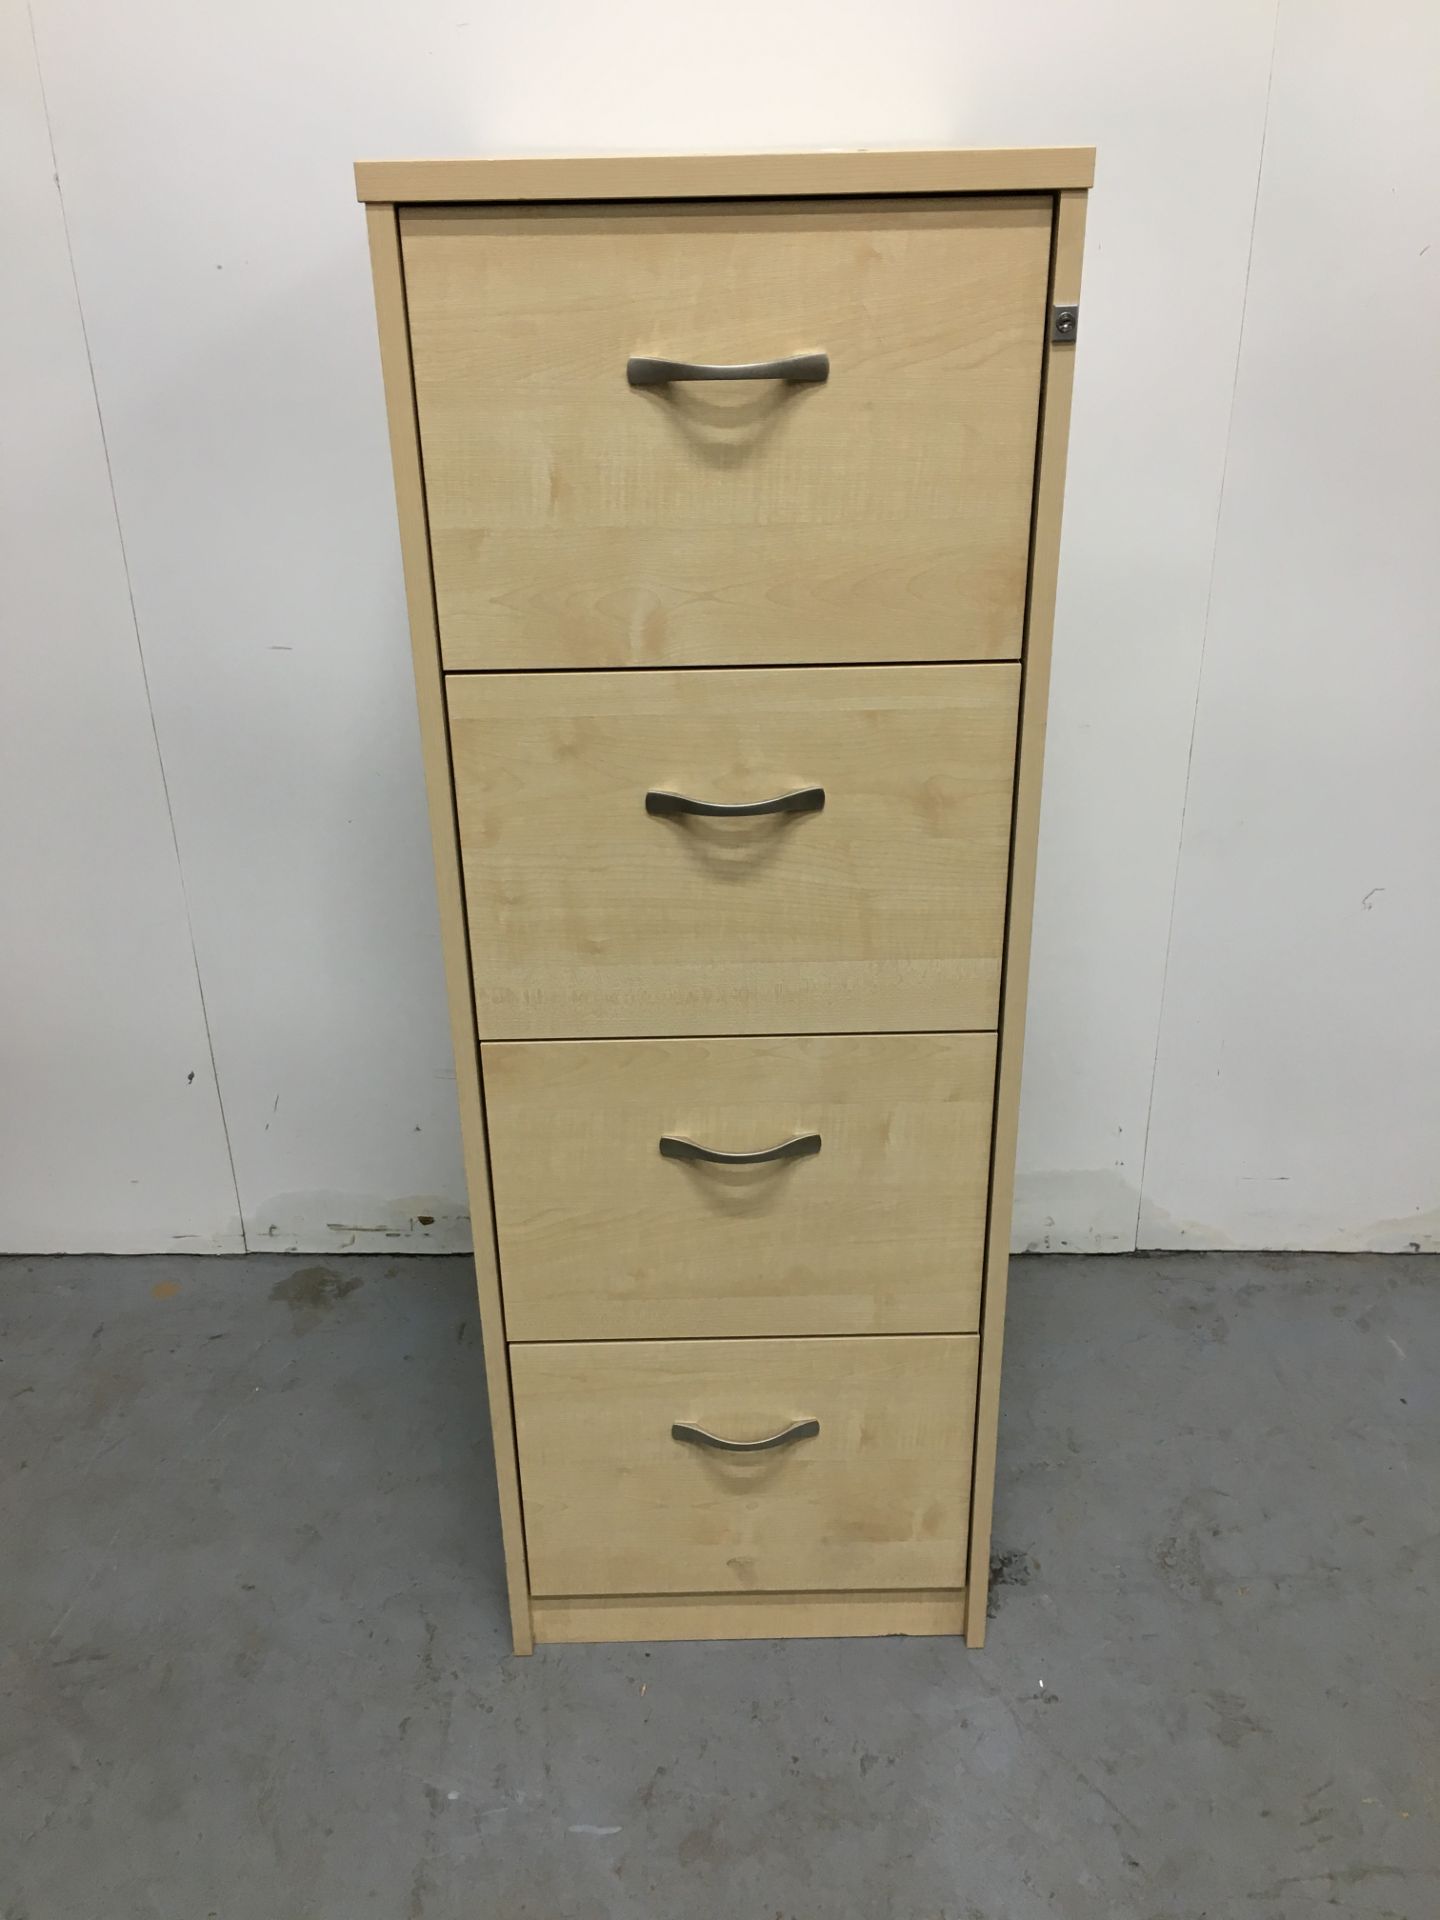 4x 4 Drawer Filing Cabinets in Beech Wood Finish